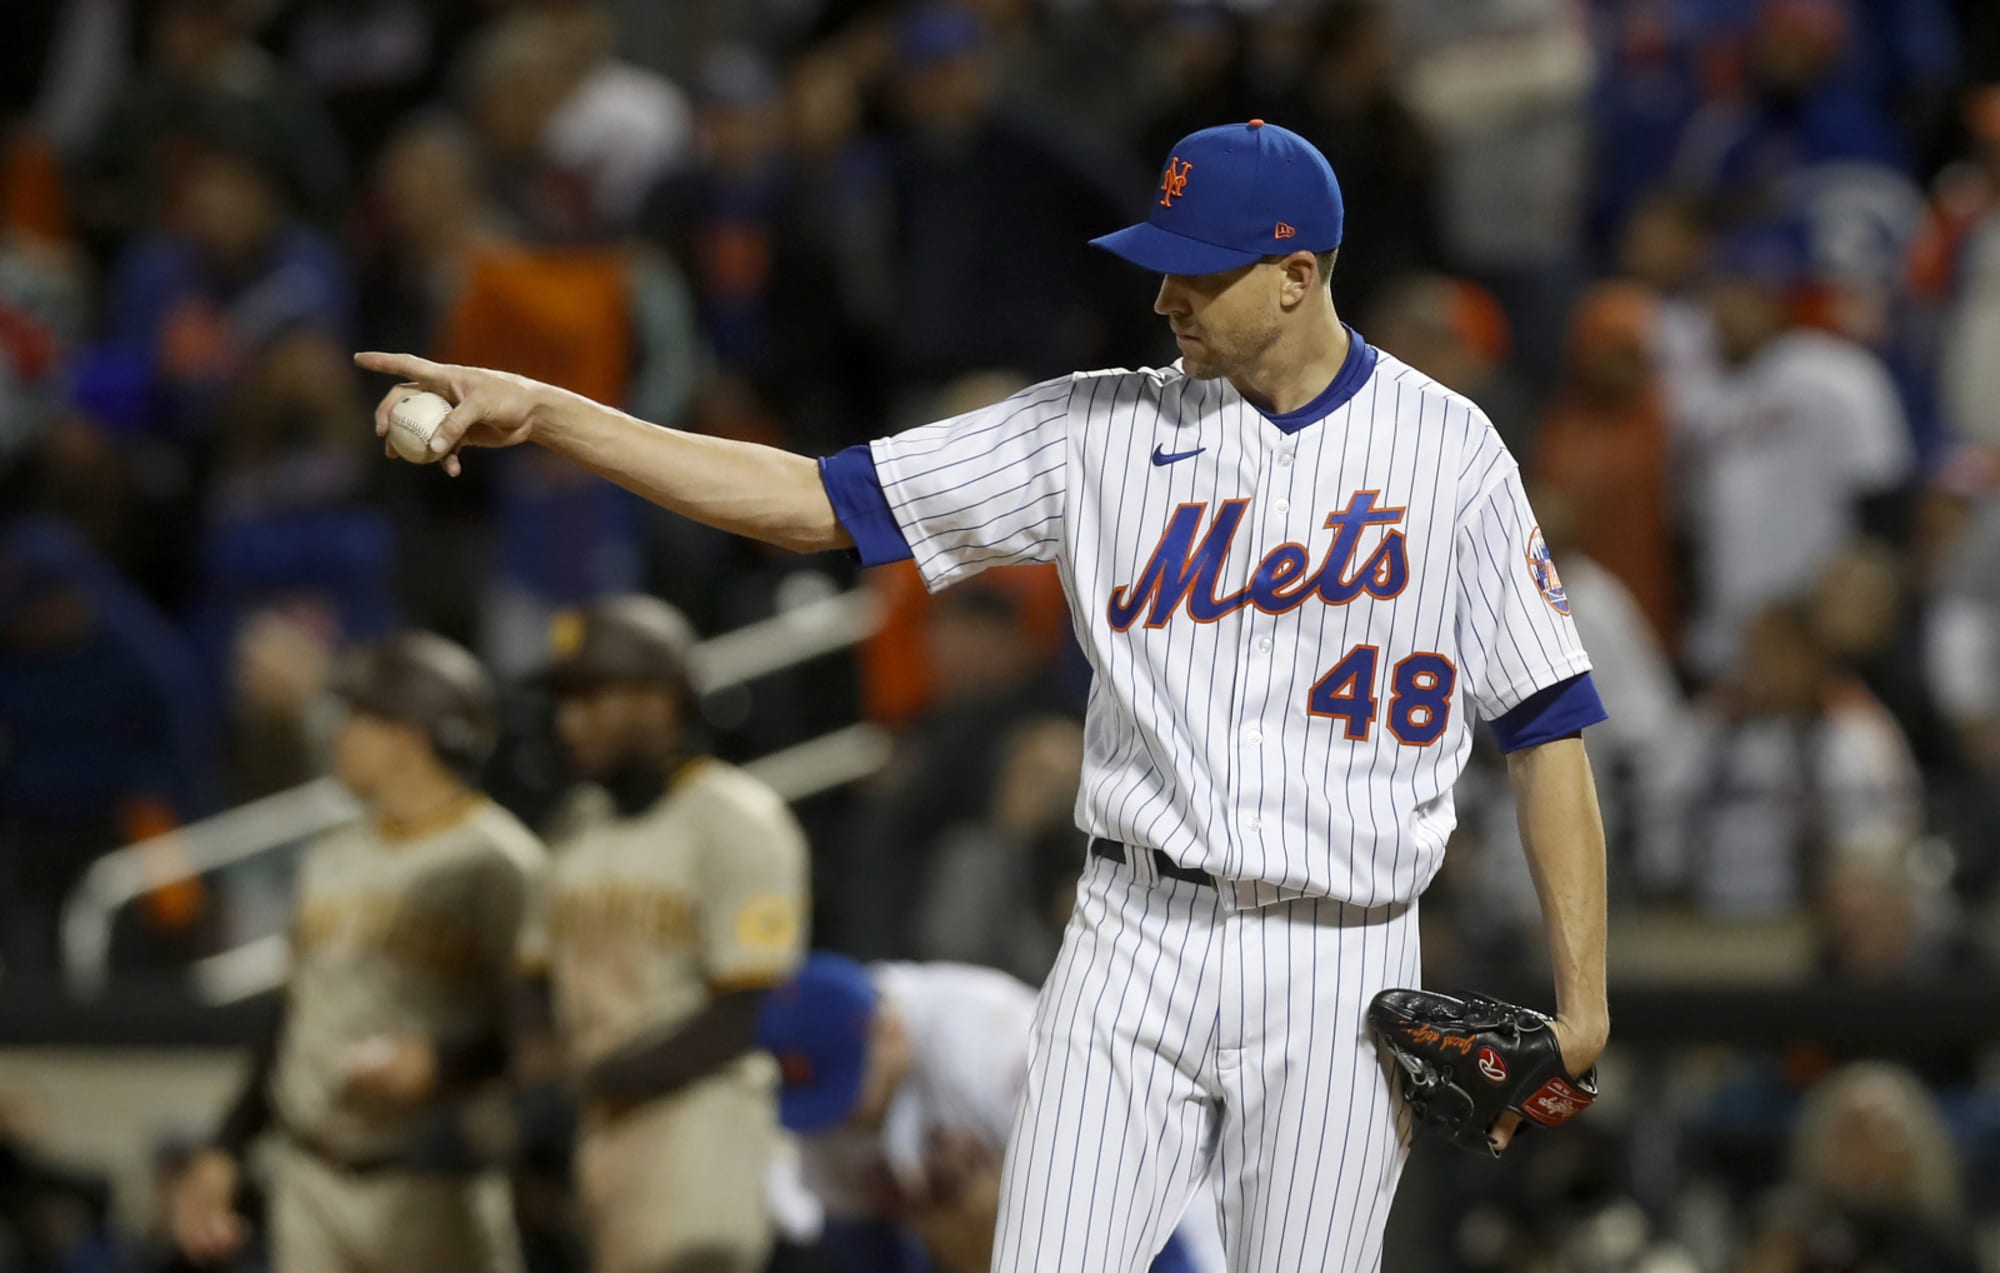 Rangers transfer Jacob deGrom to 60-day IL, delaying return to